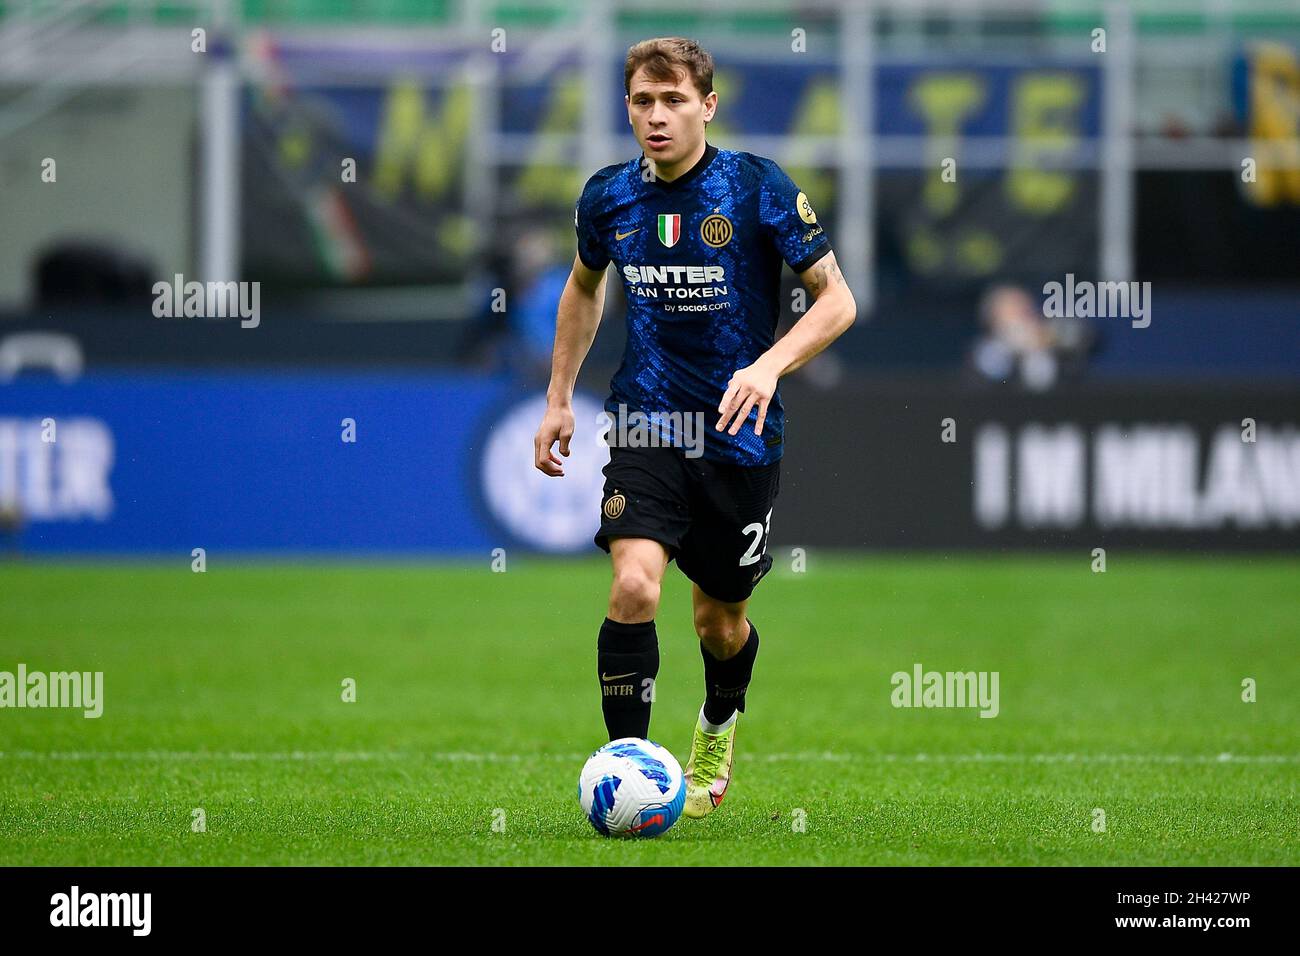 Milan, Italy. 31 October 2021. Nicolo Barella of FC Internazionale in  action during the Serie A football match between FC Internazionale and  Udinese Calcio. Credit: Nicolò Campo/Alamy Live News Stock Photo - Alamy